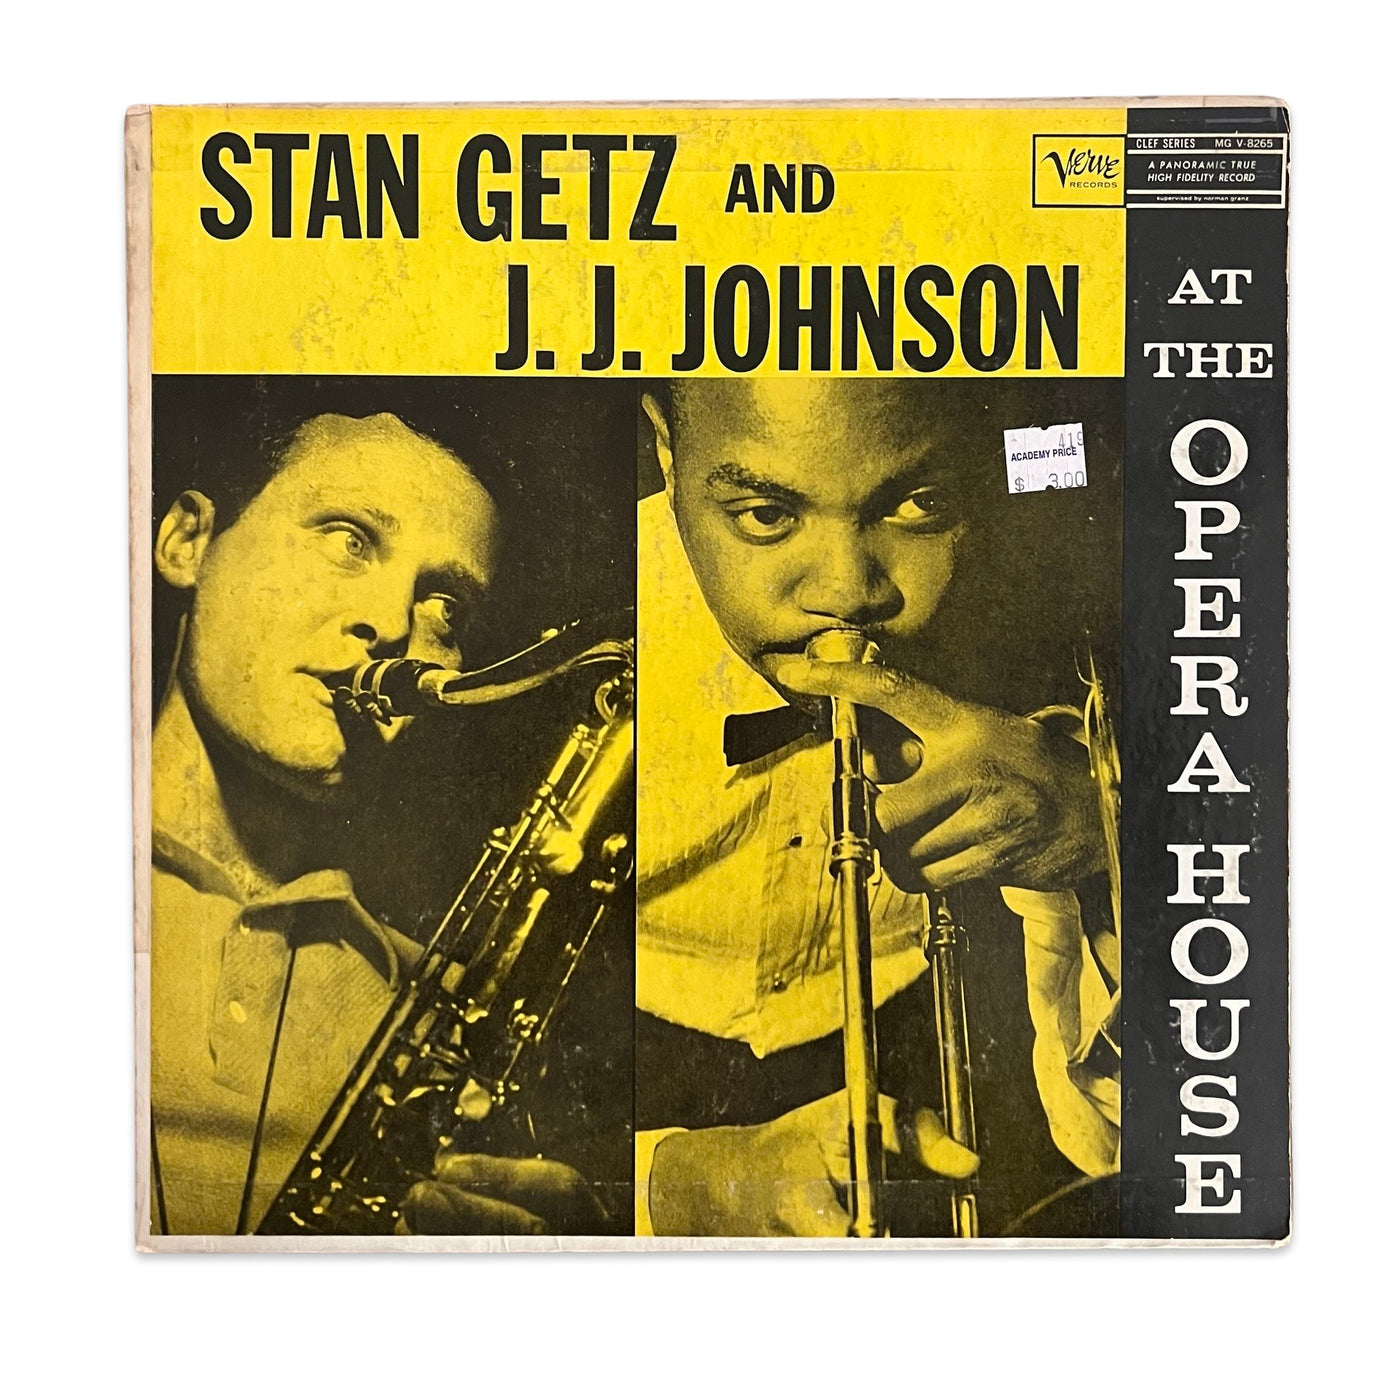 Stan Getz And J.J. Johnson - At The Opera House